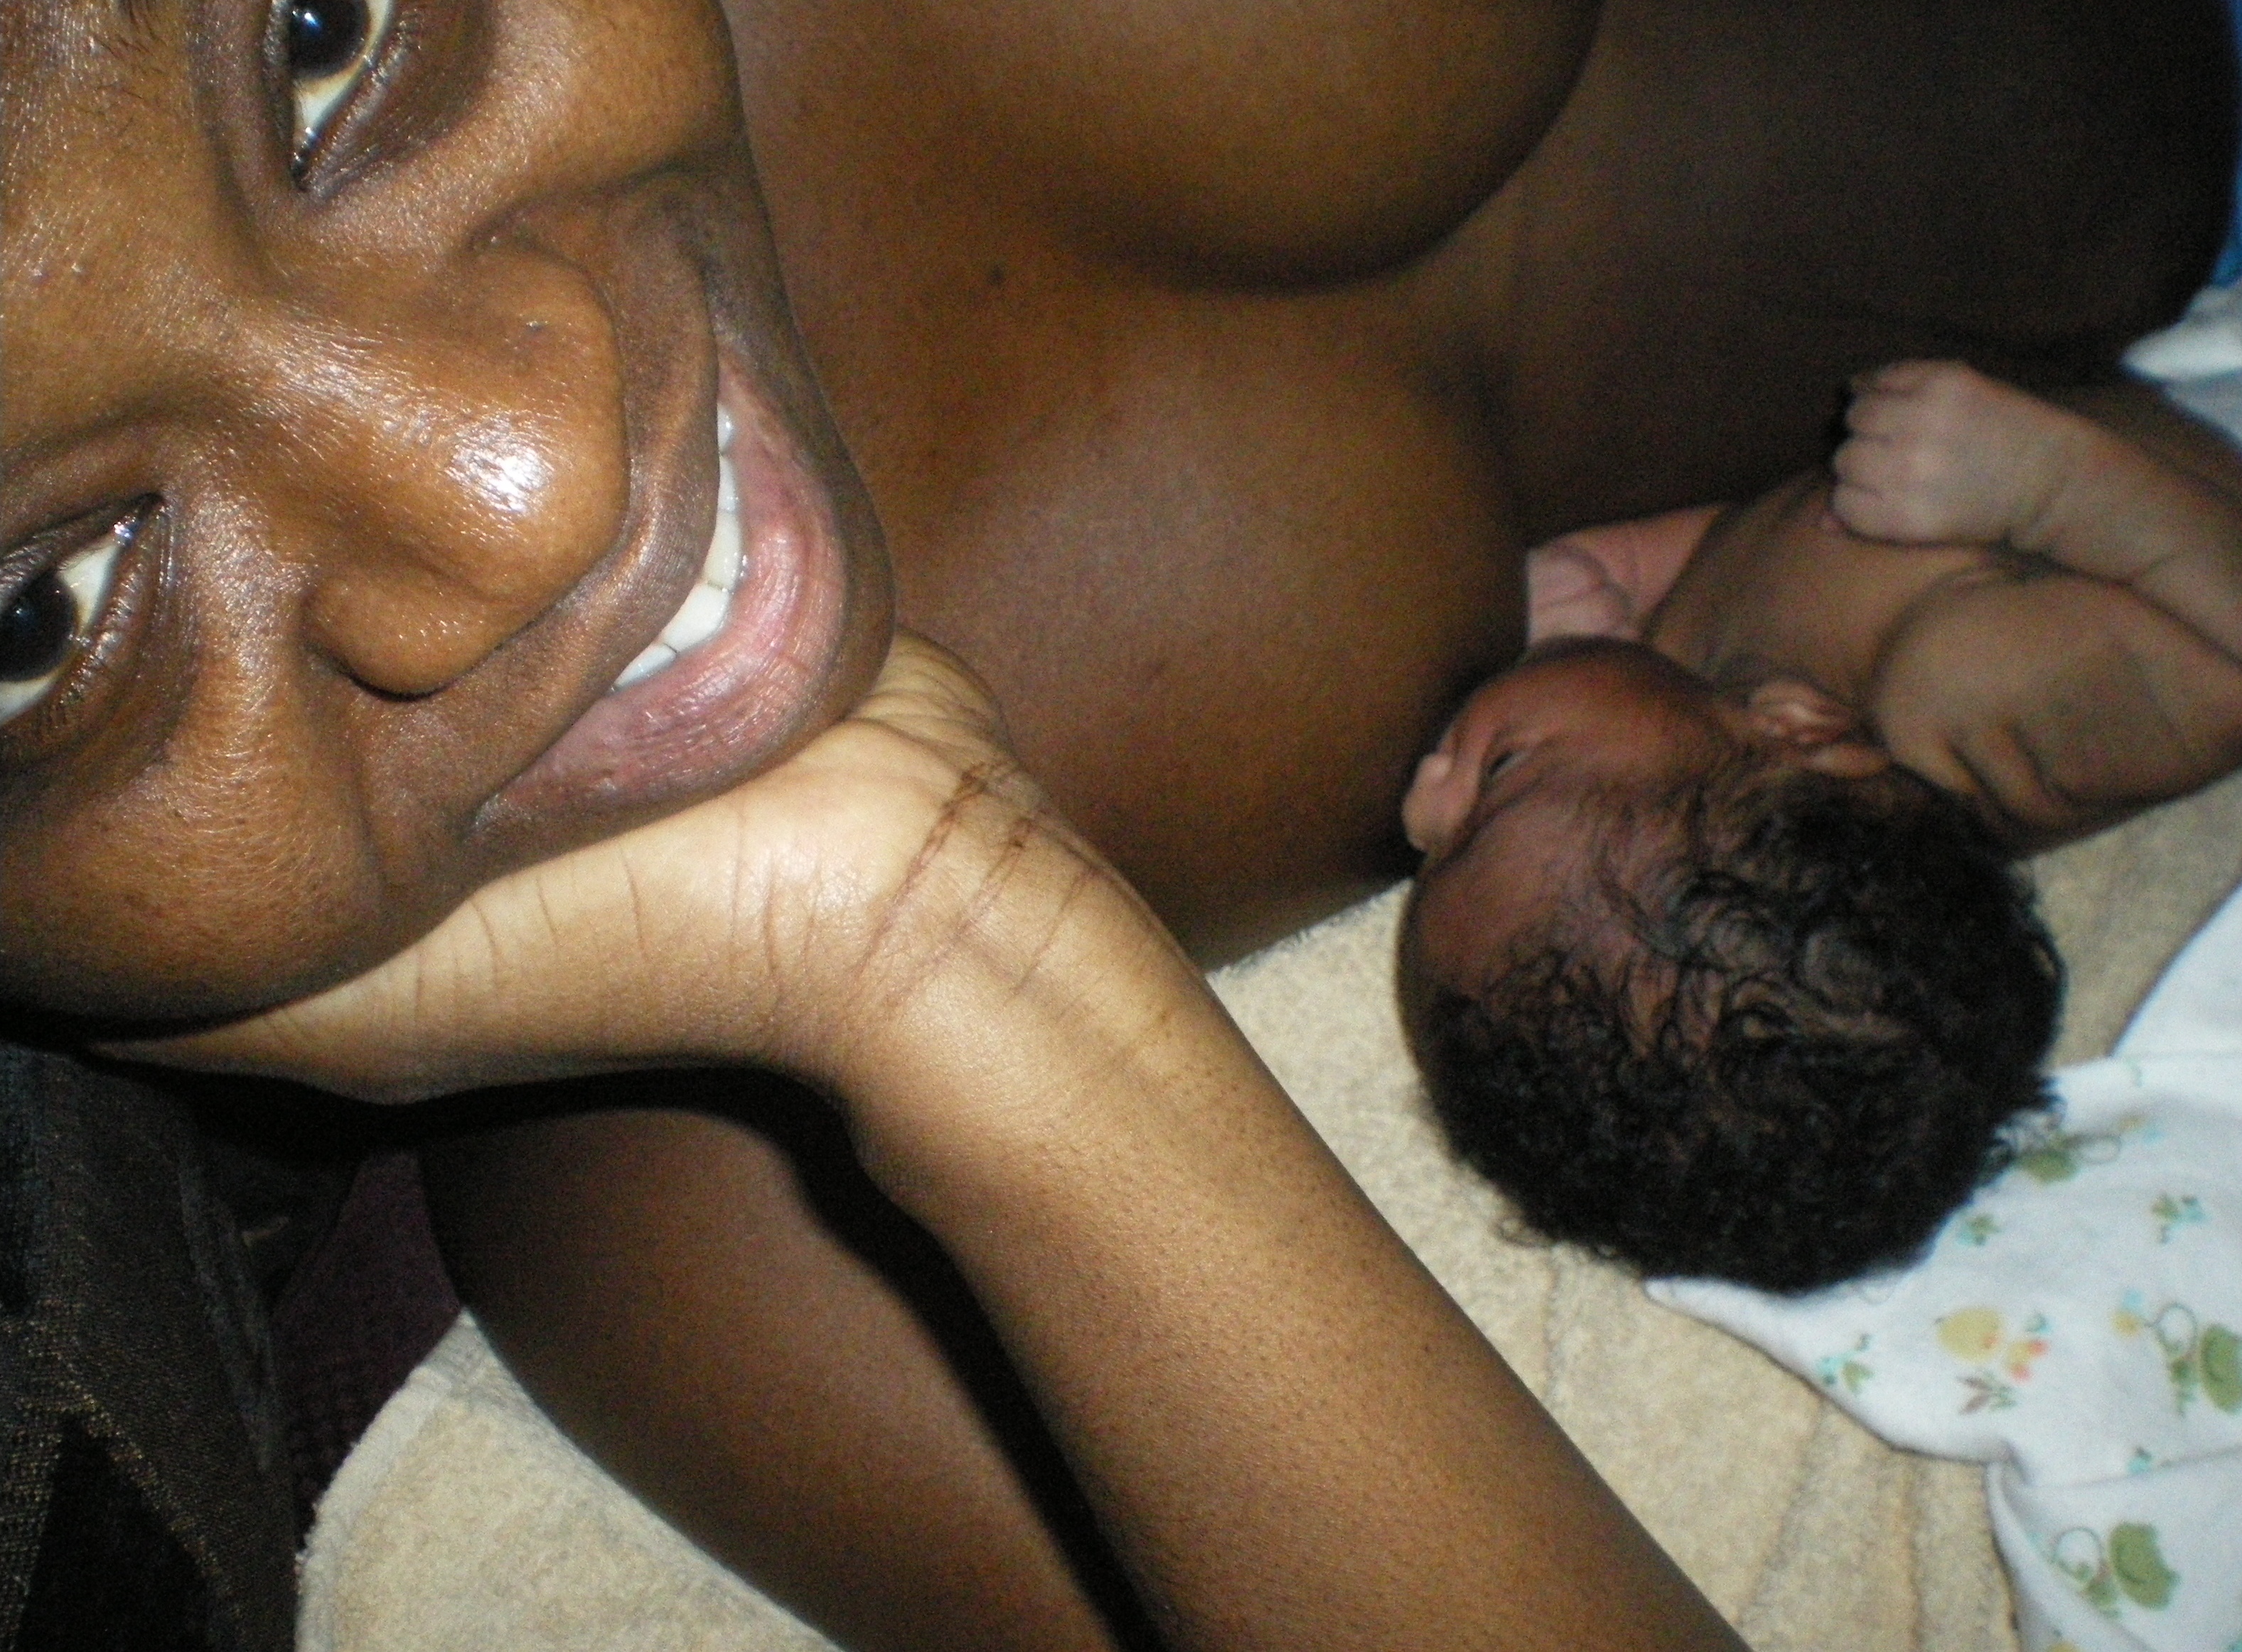 This is what I found when I googled: "African woman breastfeeding baby...